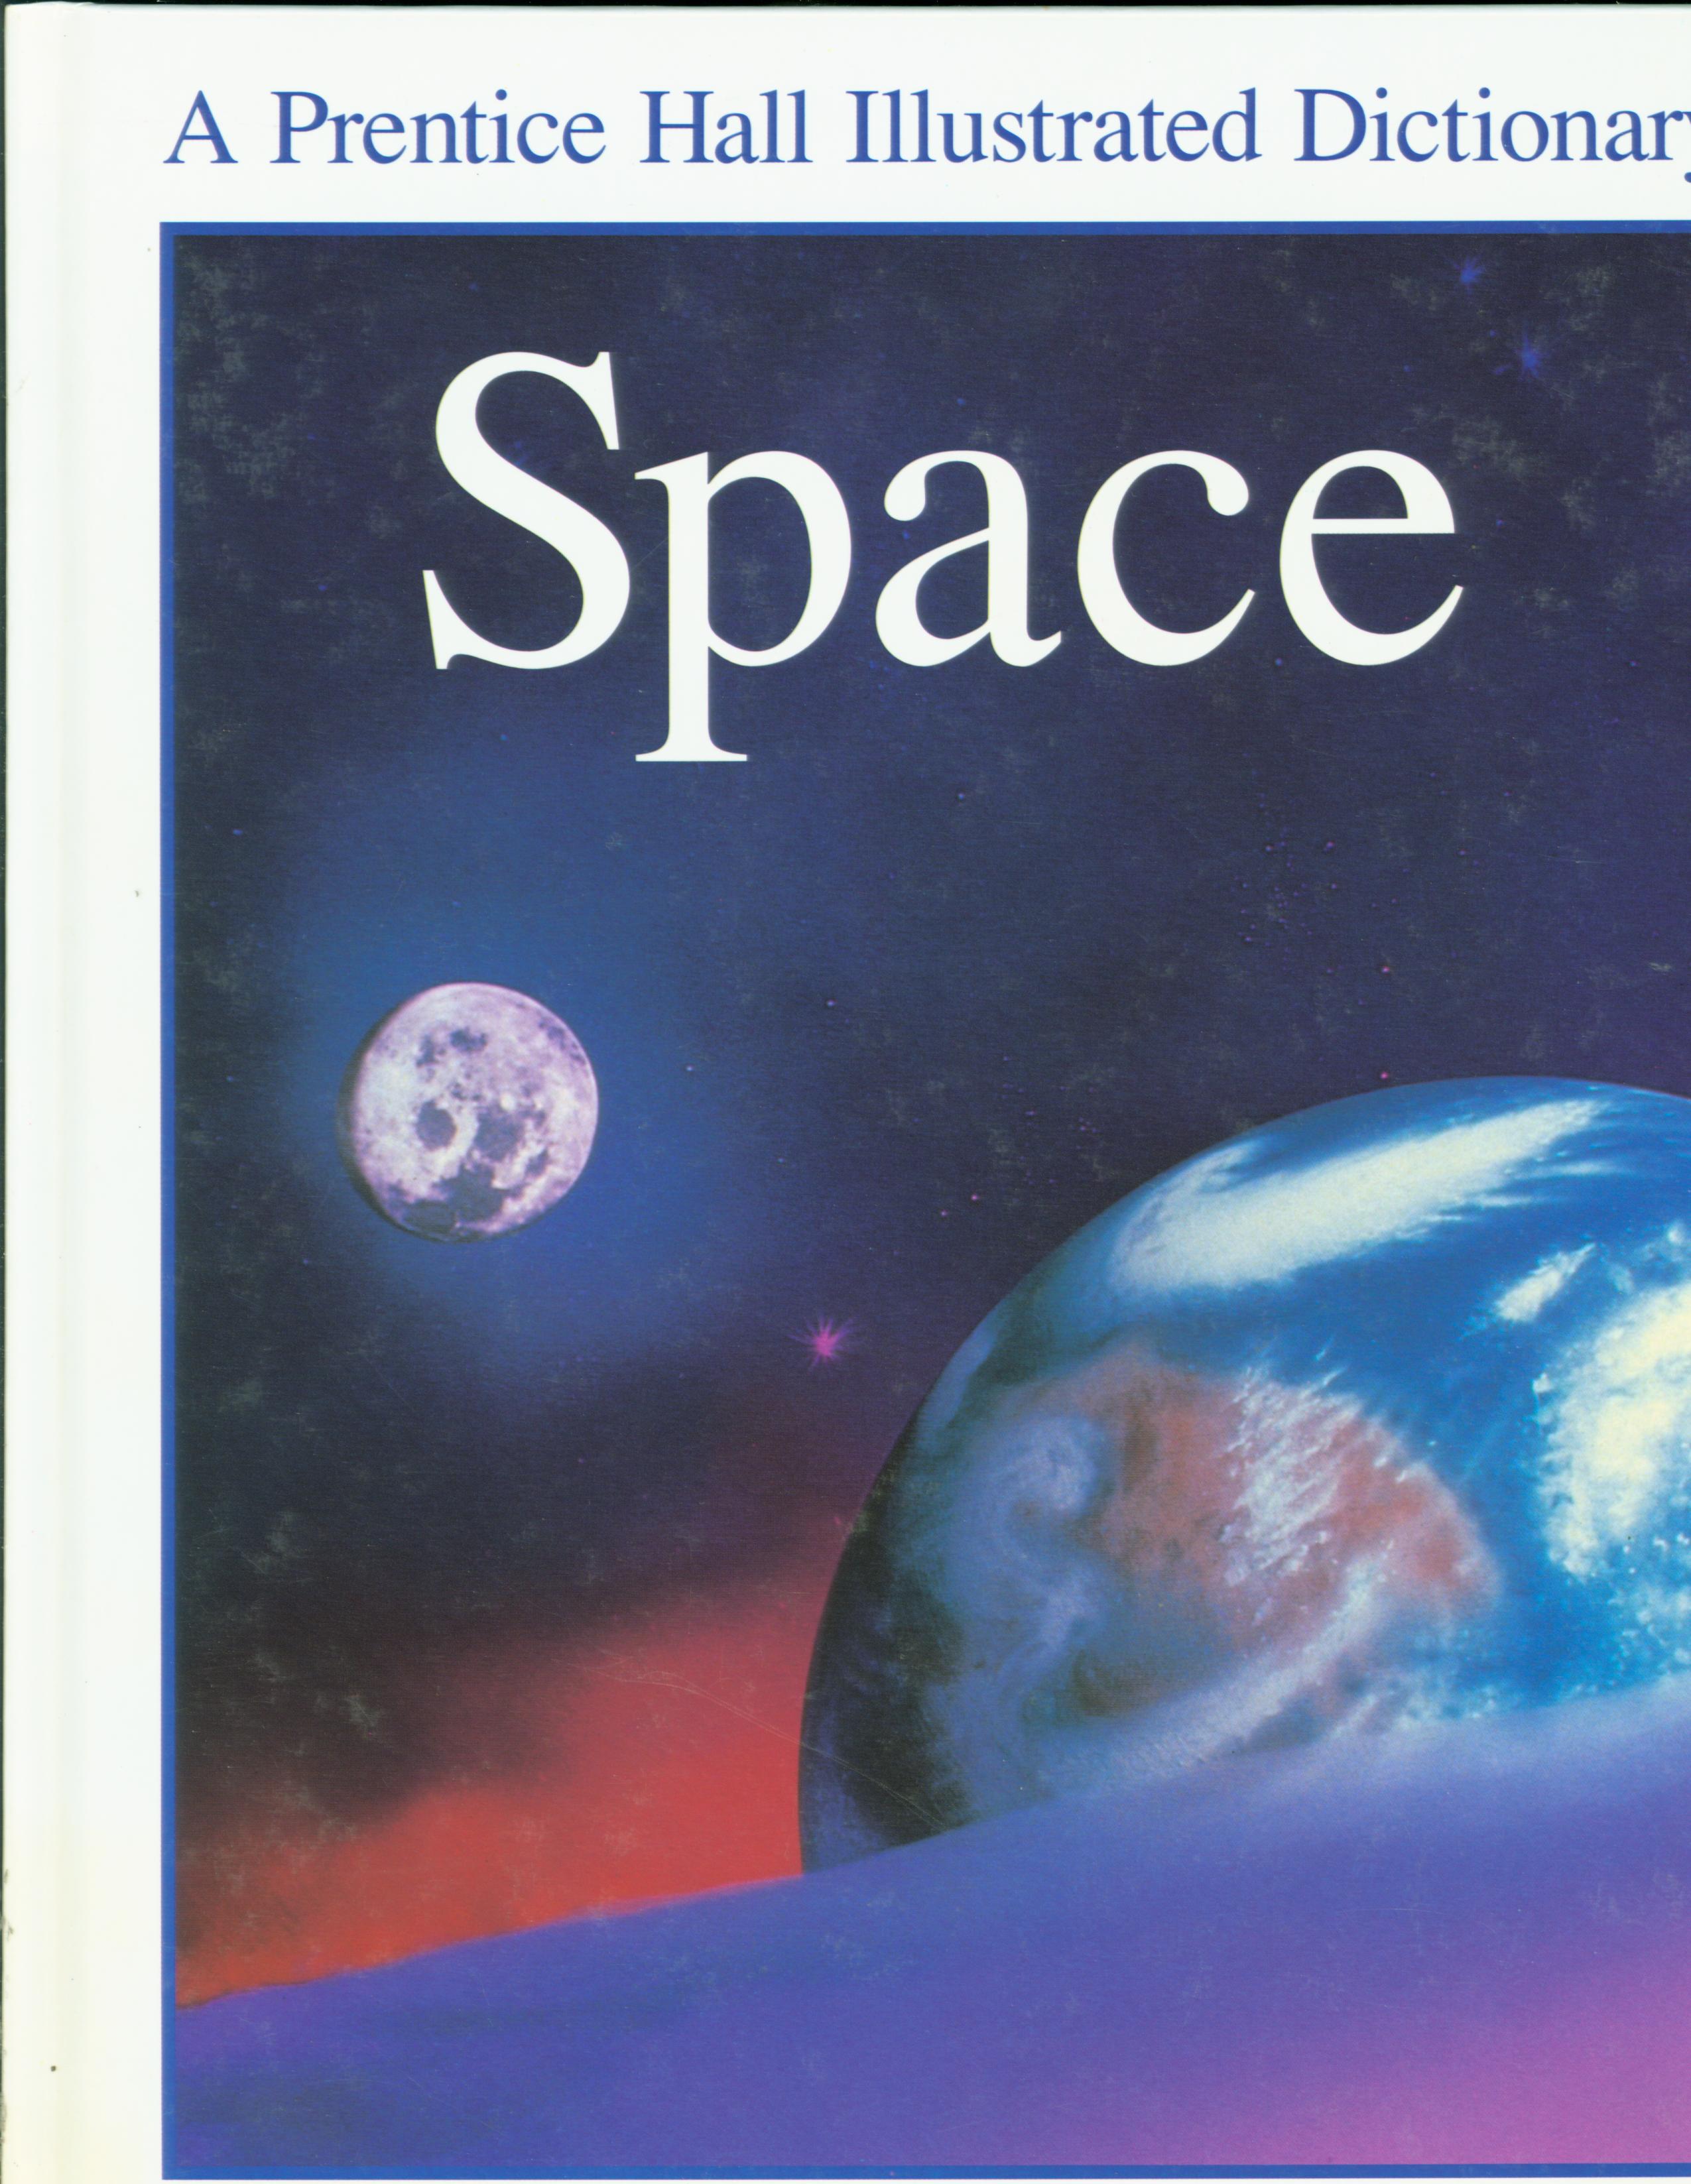 SPACE: A Prentice Hall Illustrated Dictionary.